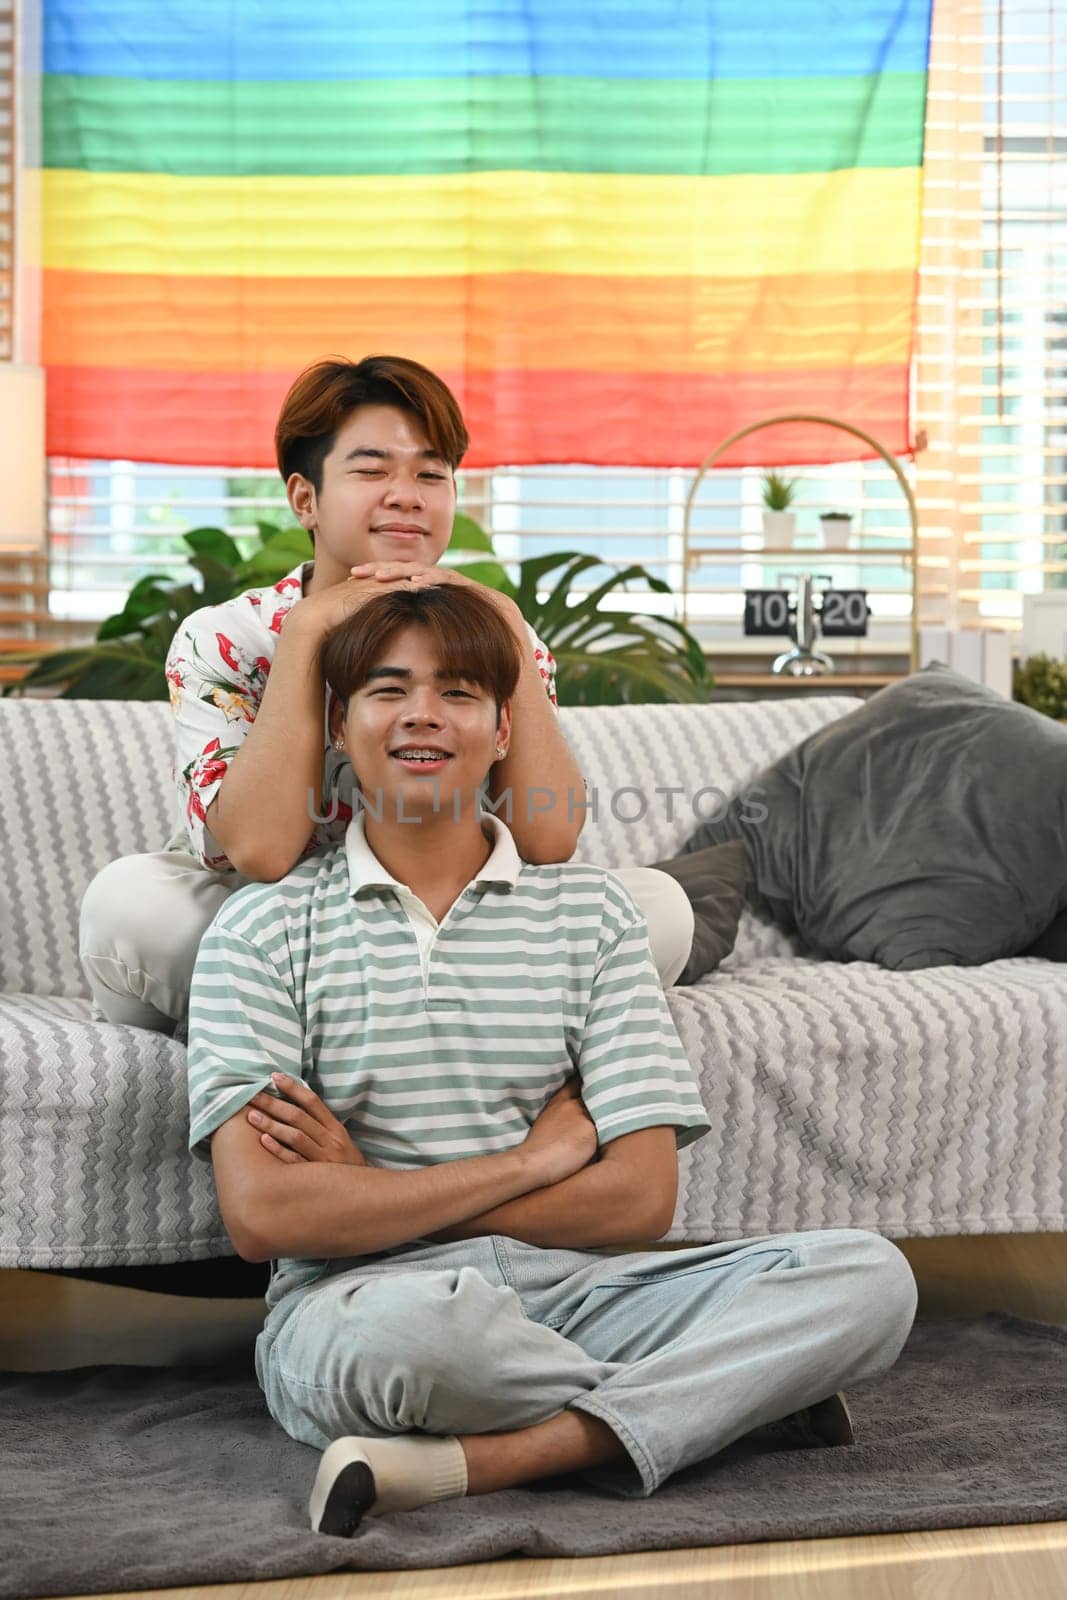 Cheerful young gay couple relaxing at home enjoying free time. LGBTQ people lifestyle concept by prathanchorruangsak